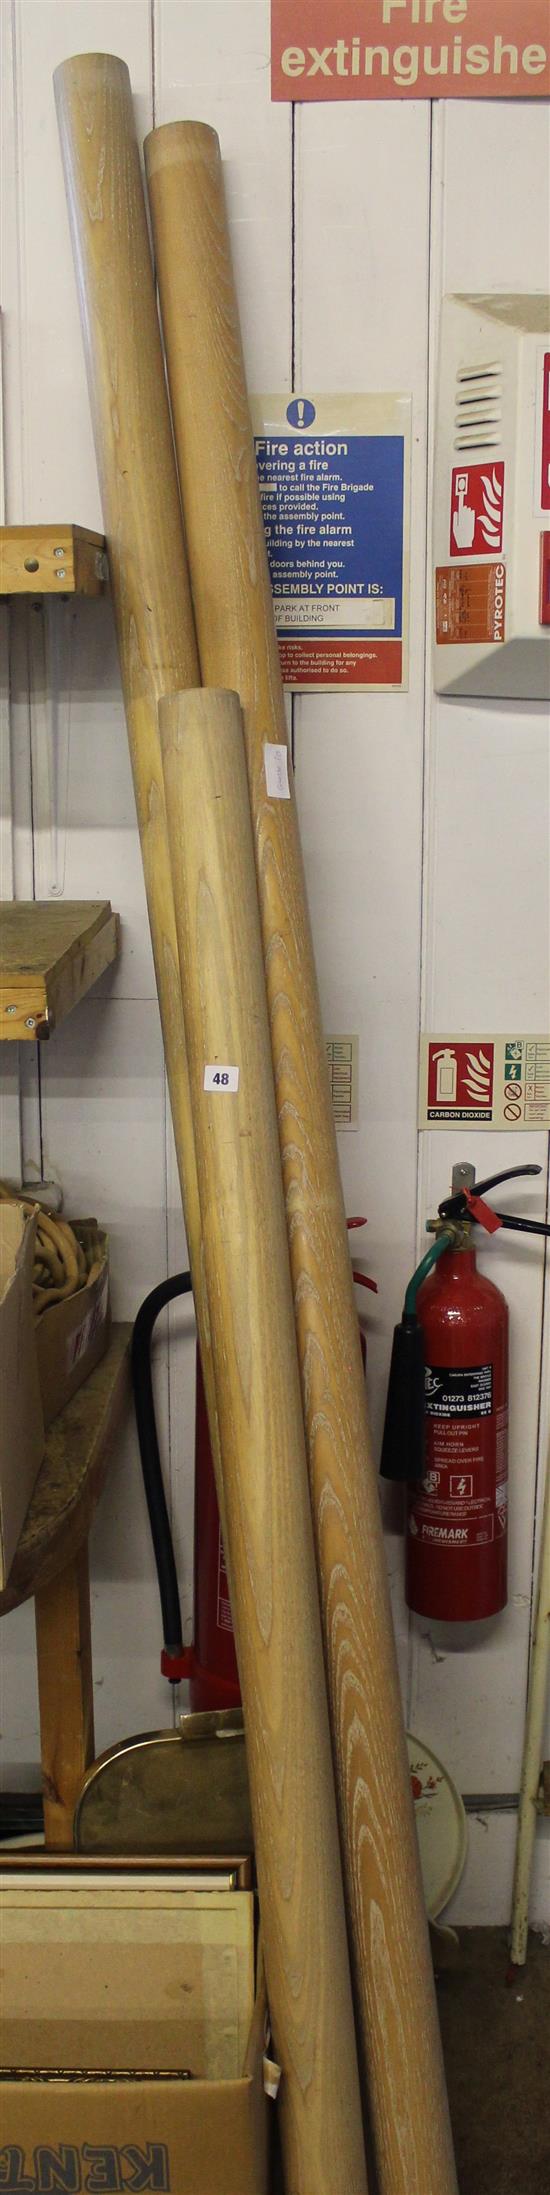 3 curtain poles with pineapple ends